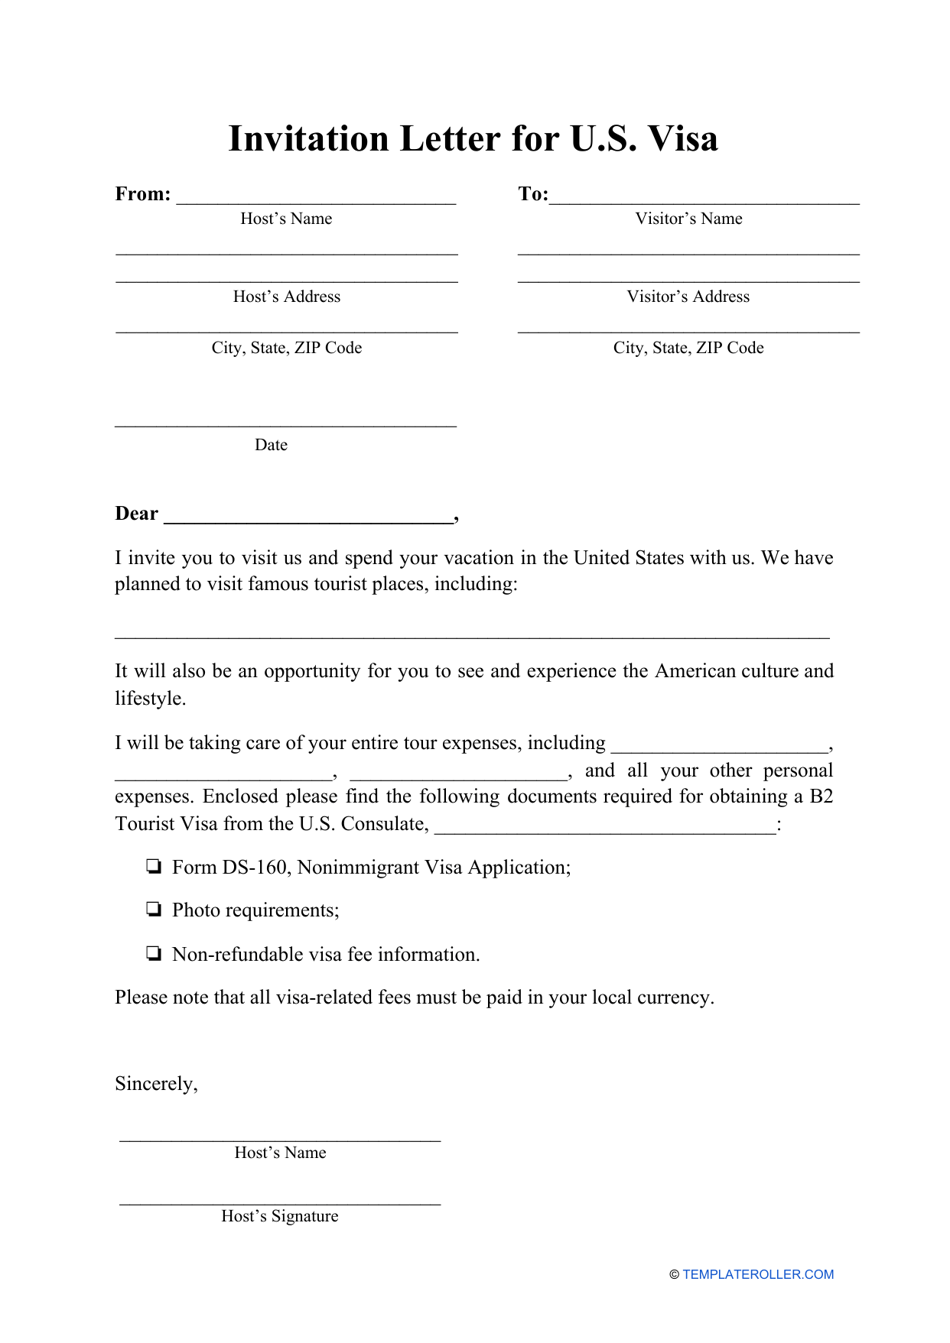 Invitation Letter for U.S. Visa Template - Fill Out, Sign Online and